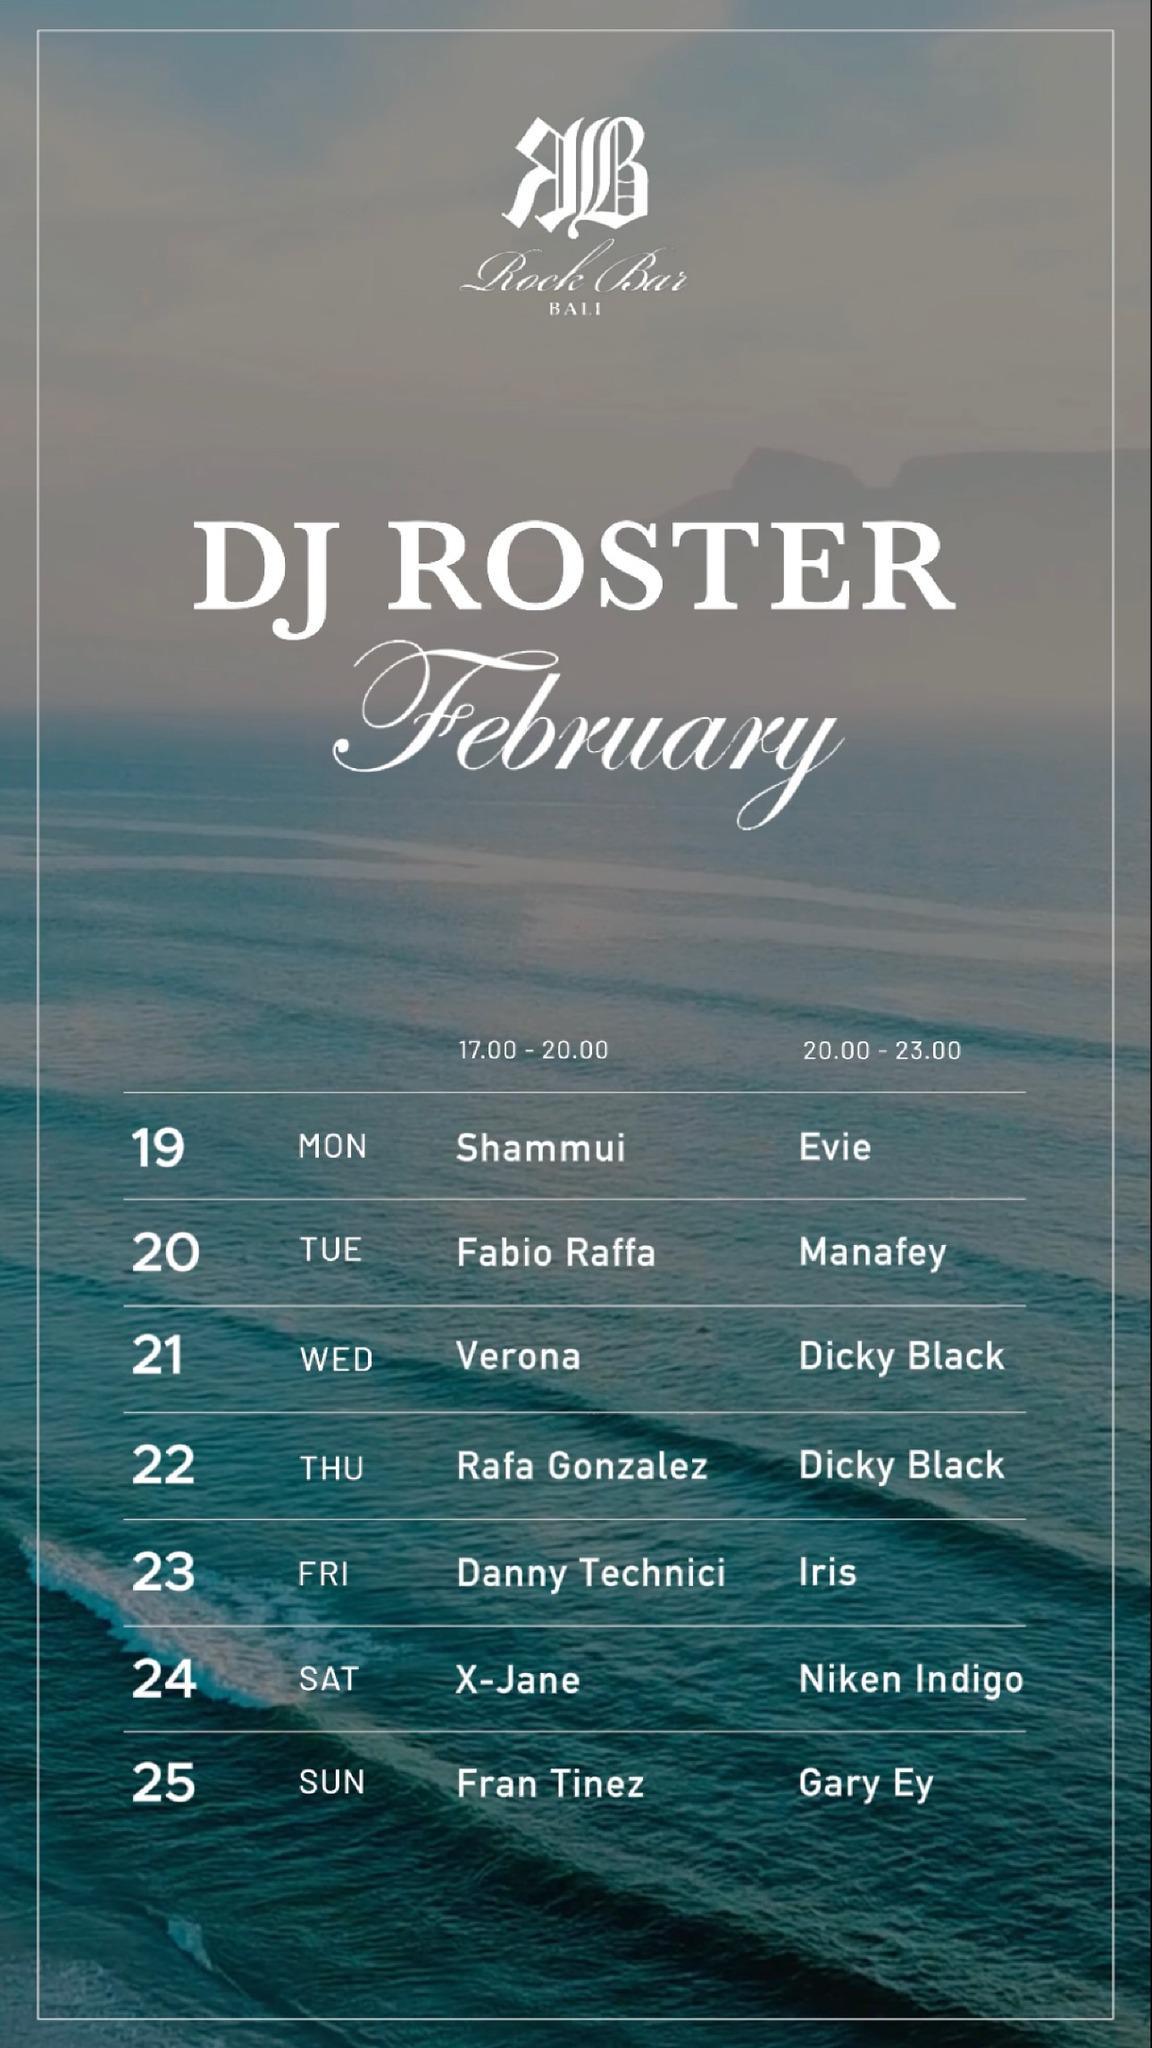 Party DJ Roster February at Rock Bar 14370